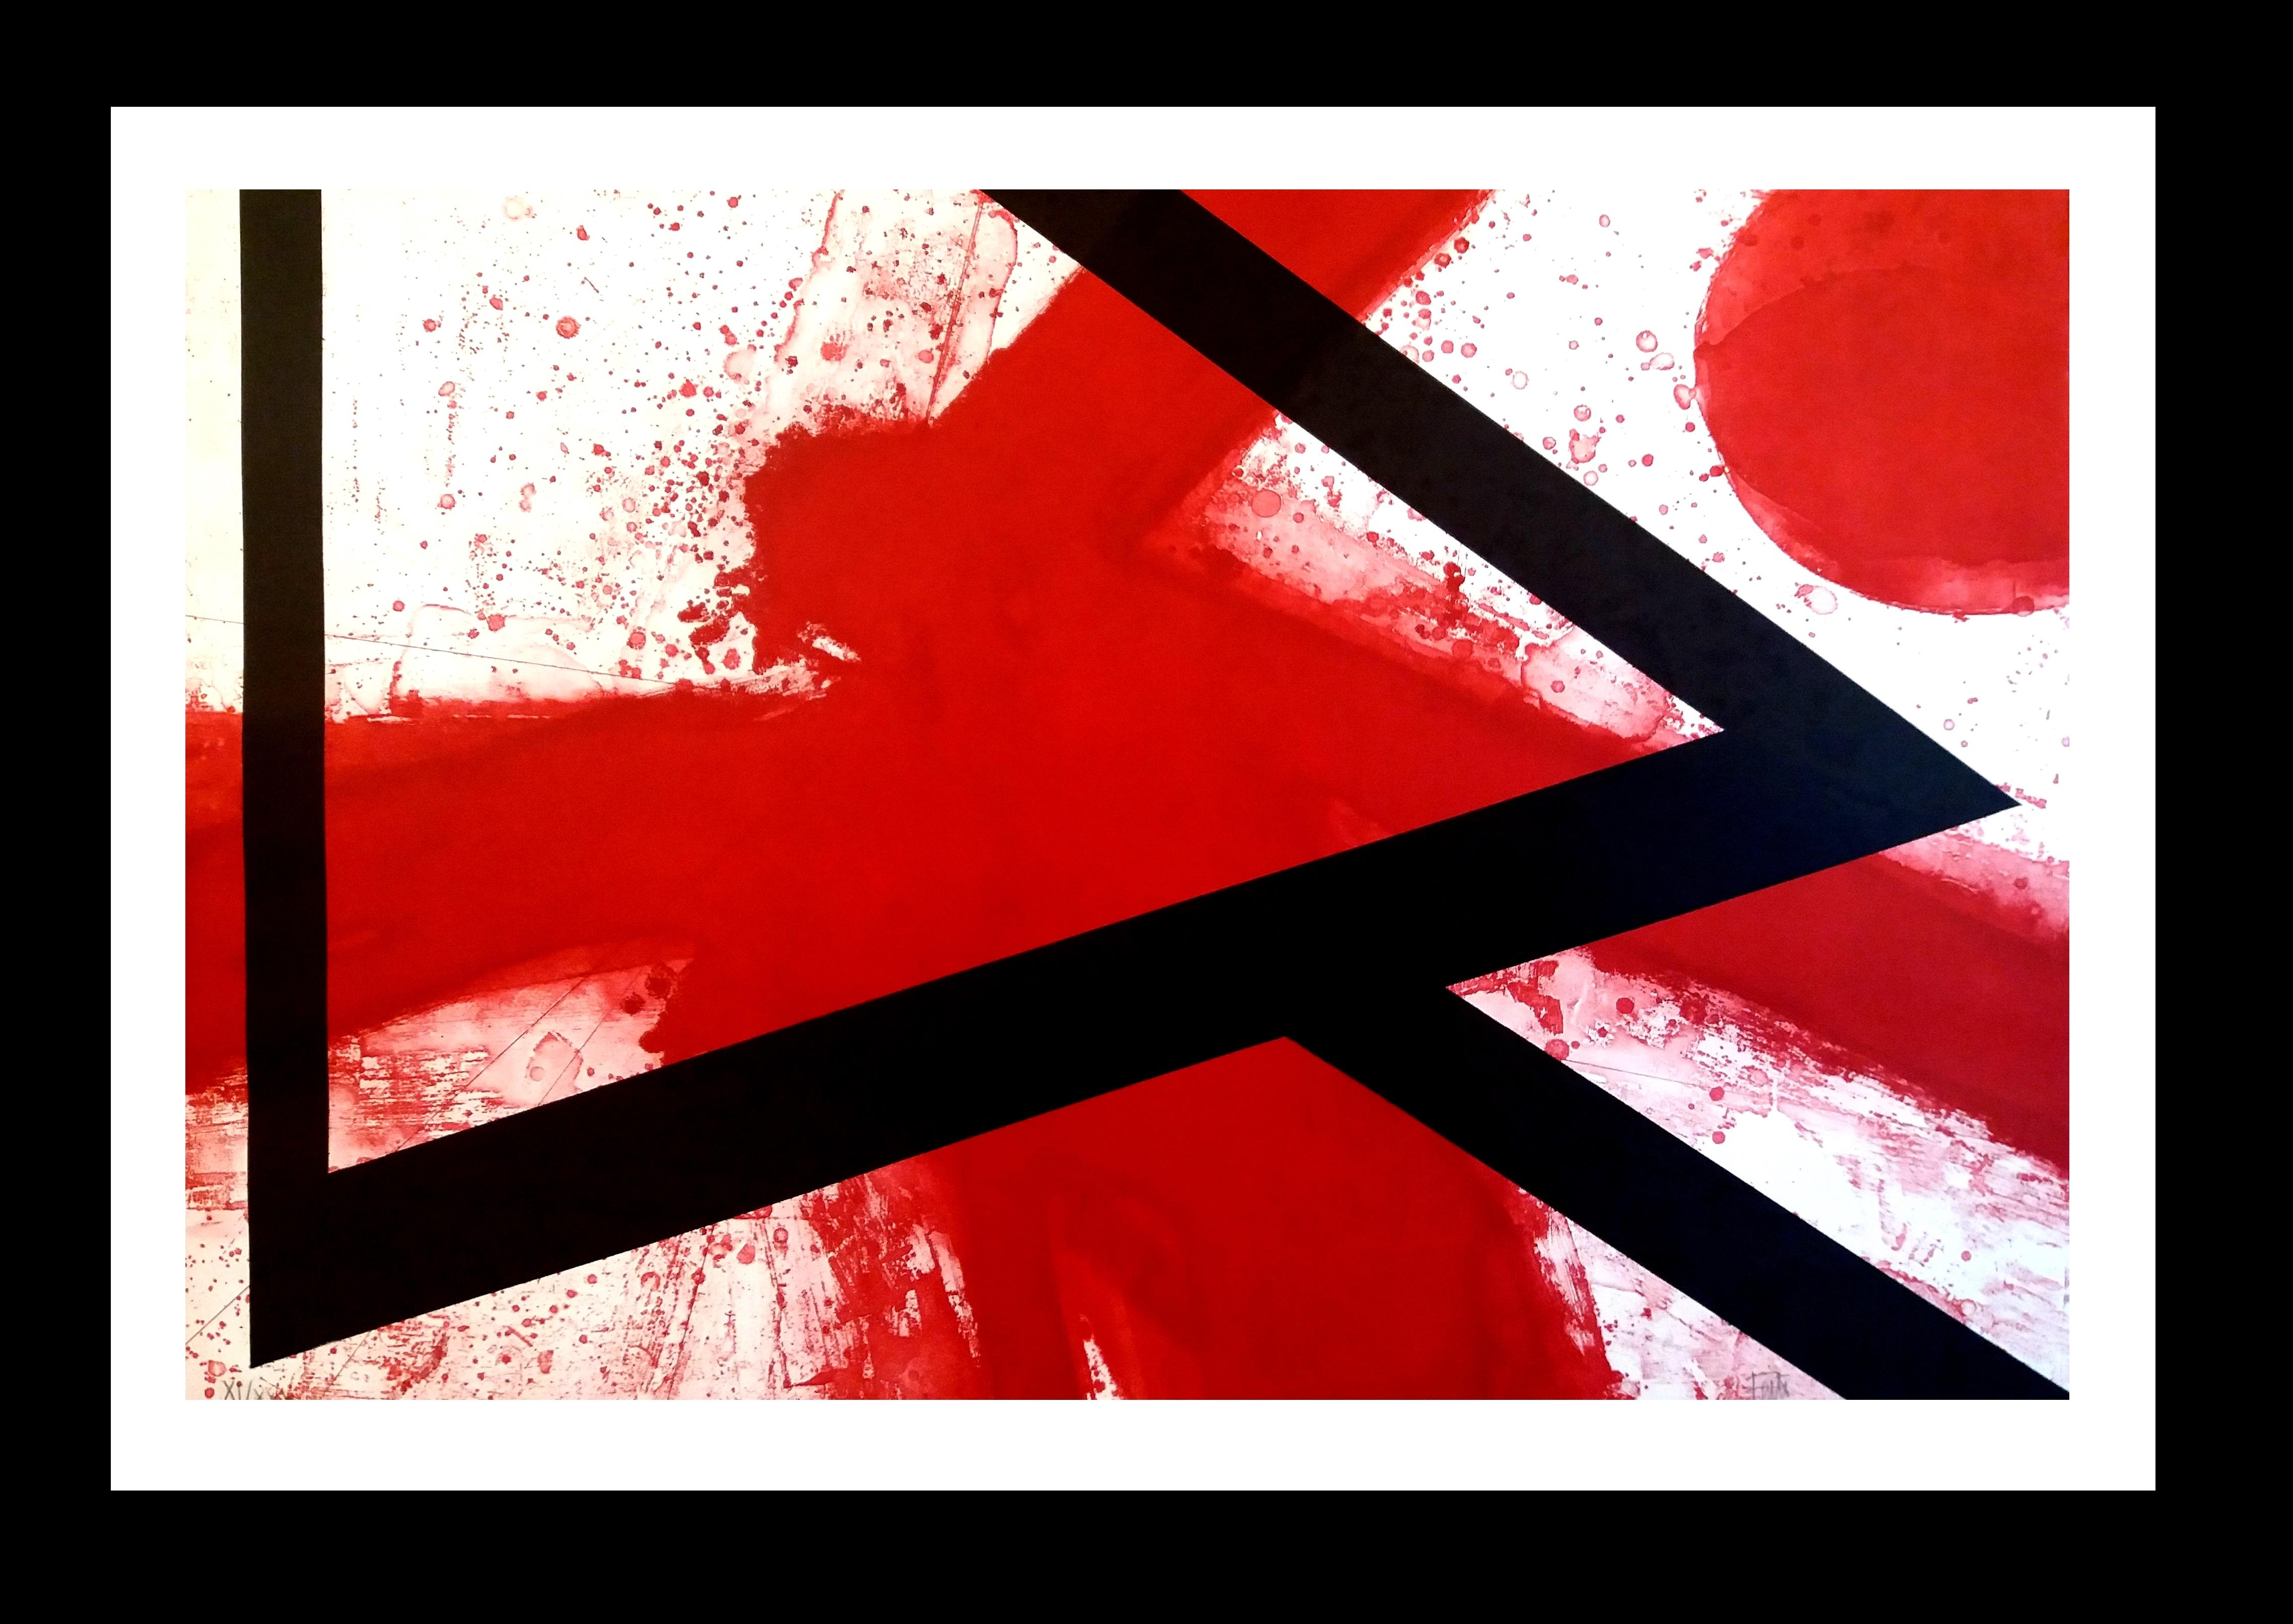 Feito Abstract. Red White  Black  limited edition painting - Painting by Luis Feito López